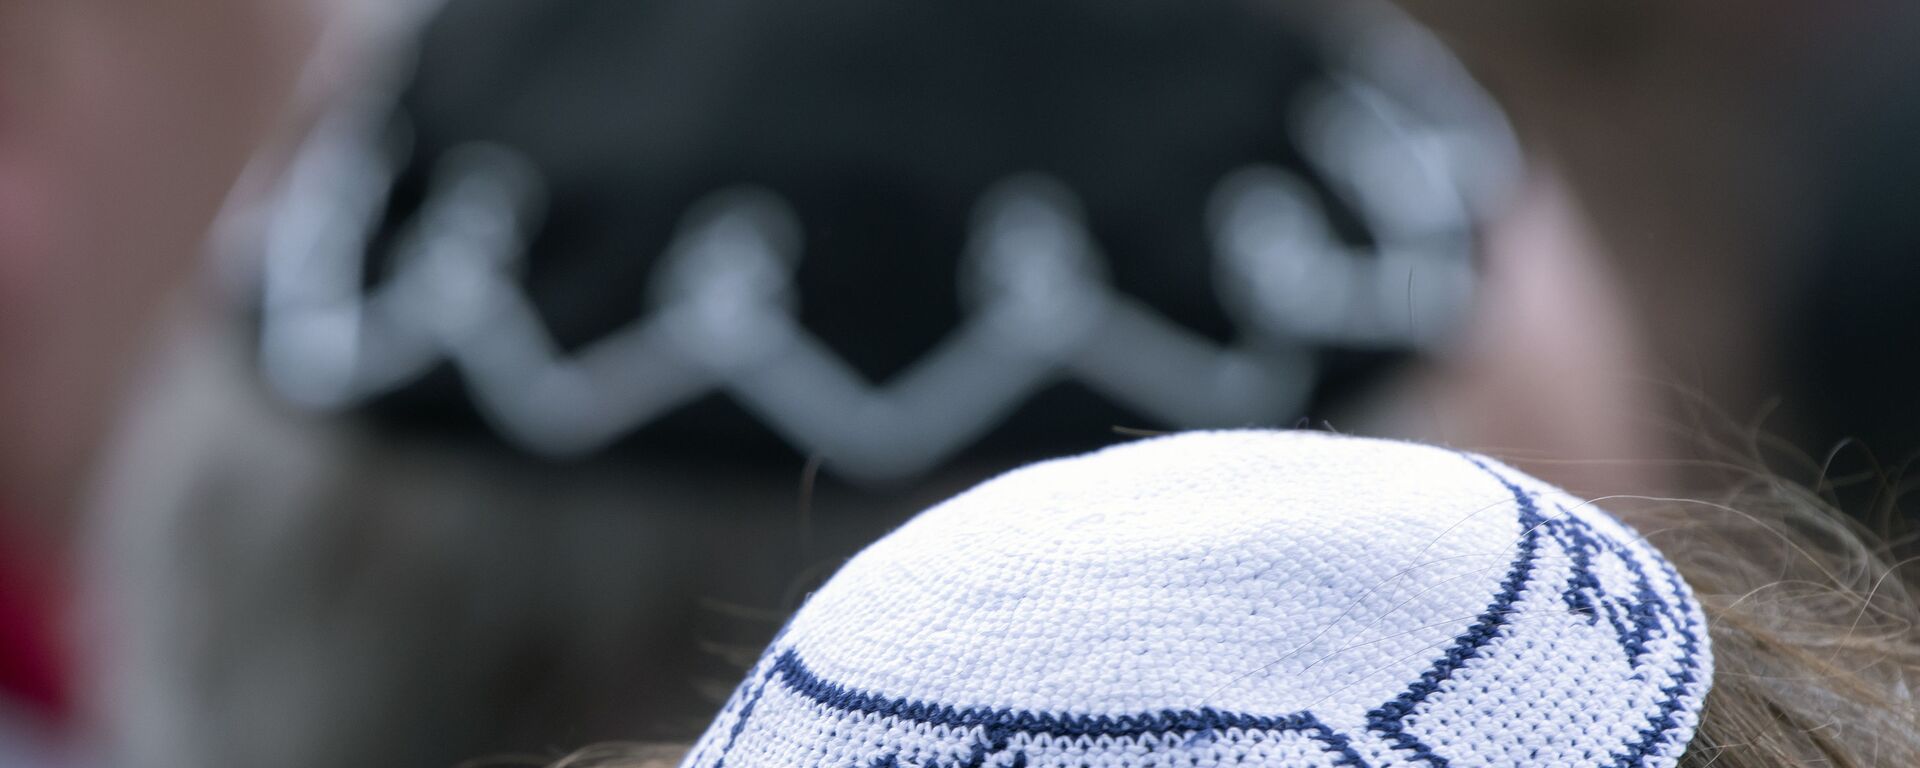 People of different faiths wear the Jewish kippah during a demonstration against antisemitism in Germany in Erfurt, Germany, Wednesday, April 25, 2018. - Sputnik International, 1920, 22.06.2020